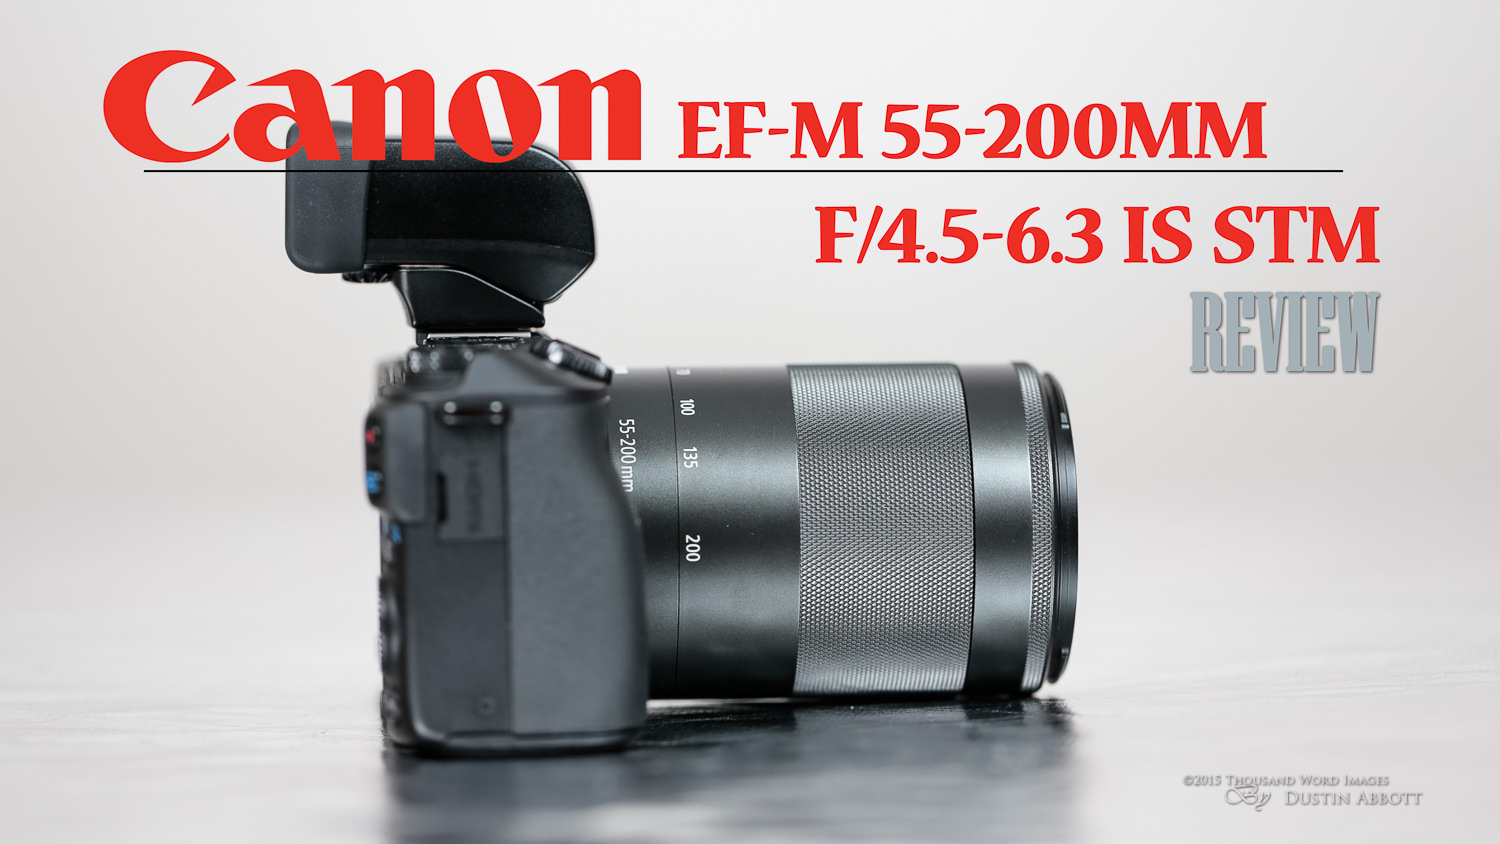 Canon EF-M 55-200mm f/4.5-6.3 IS STM Review - DustinAbbott.net